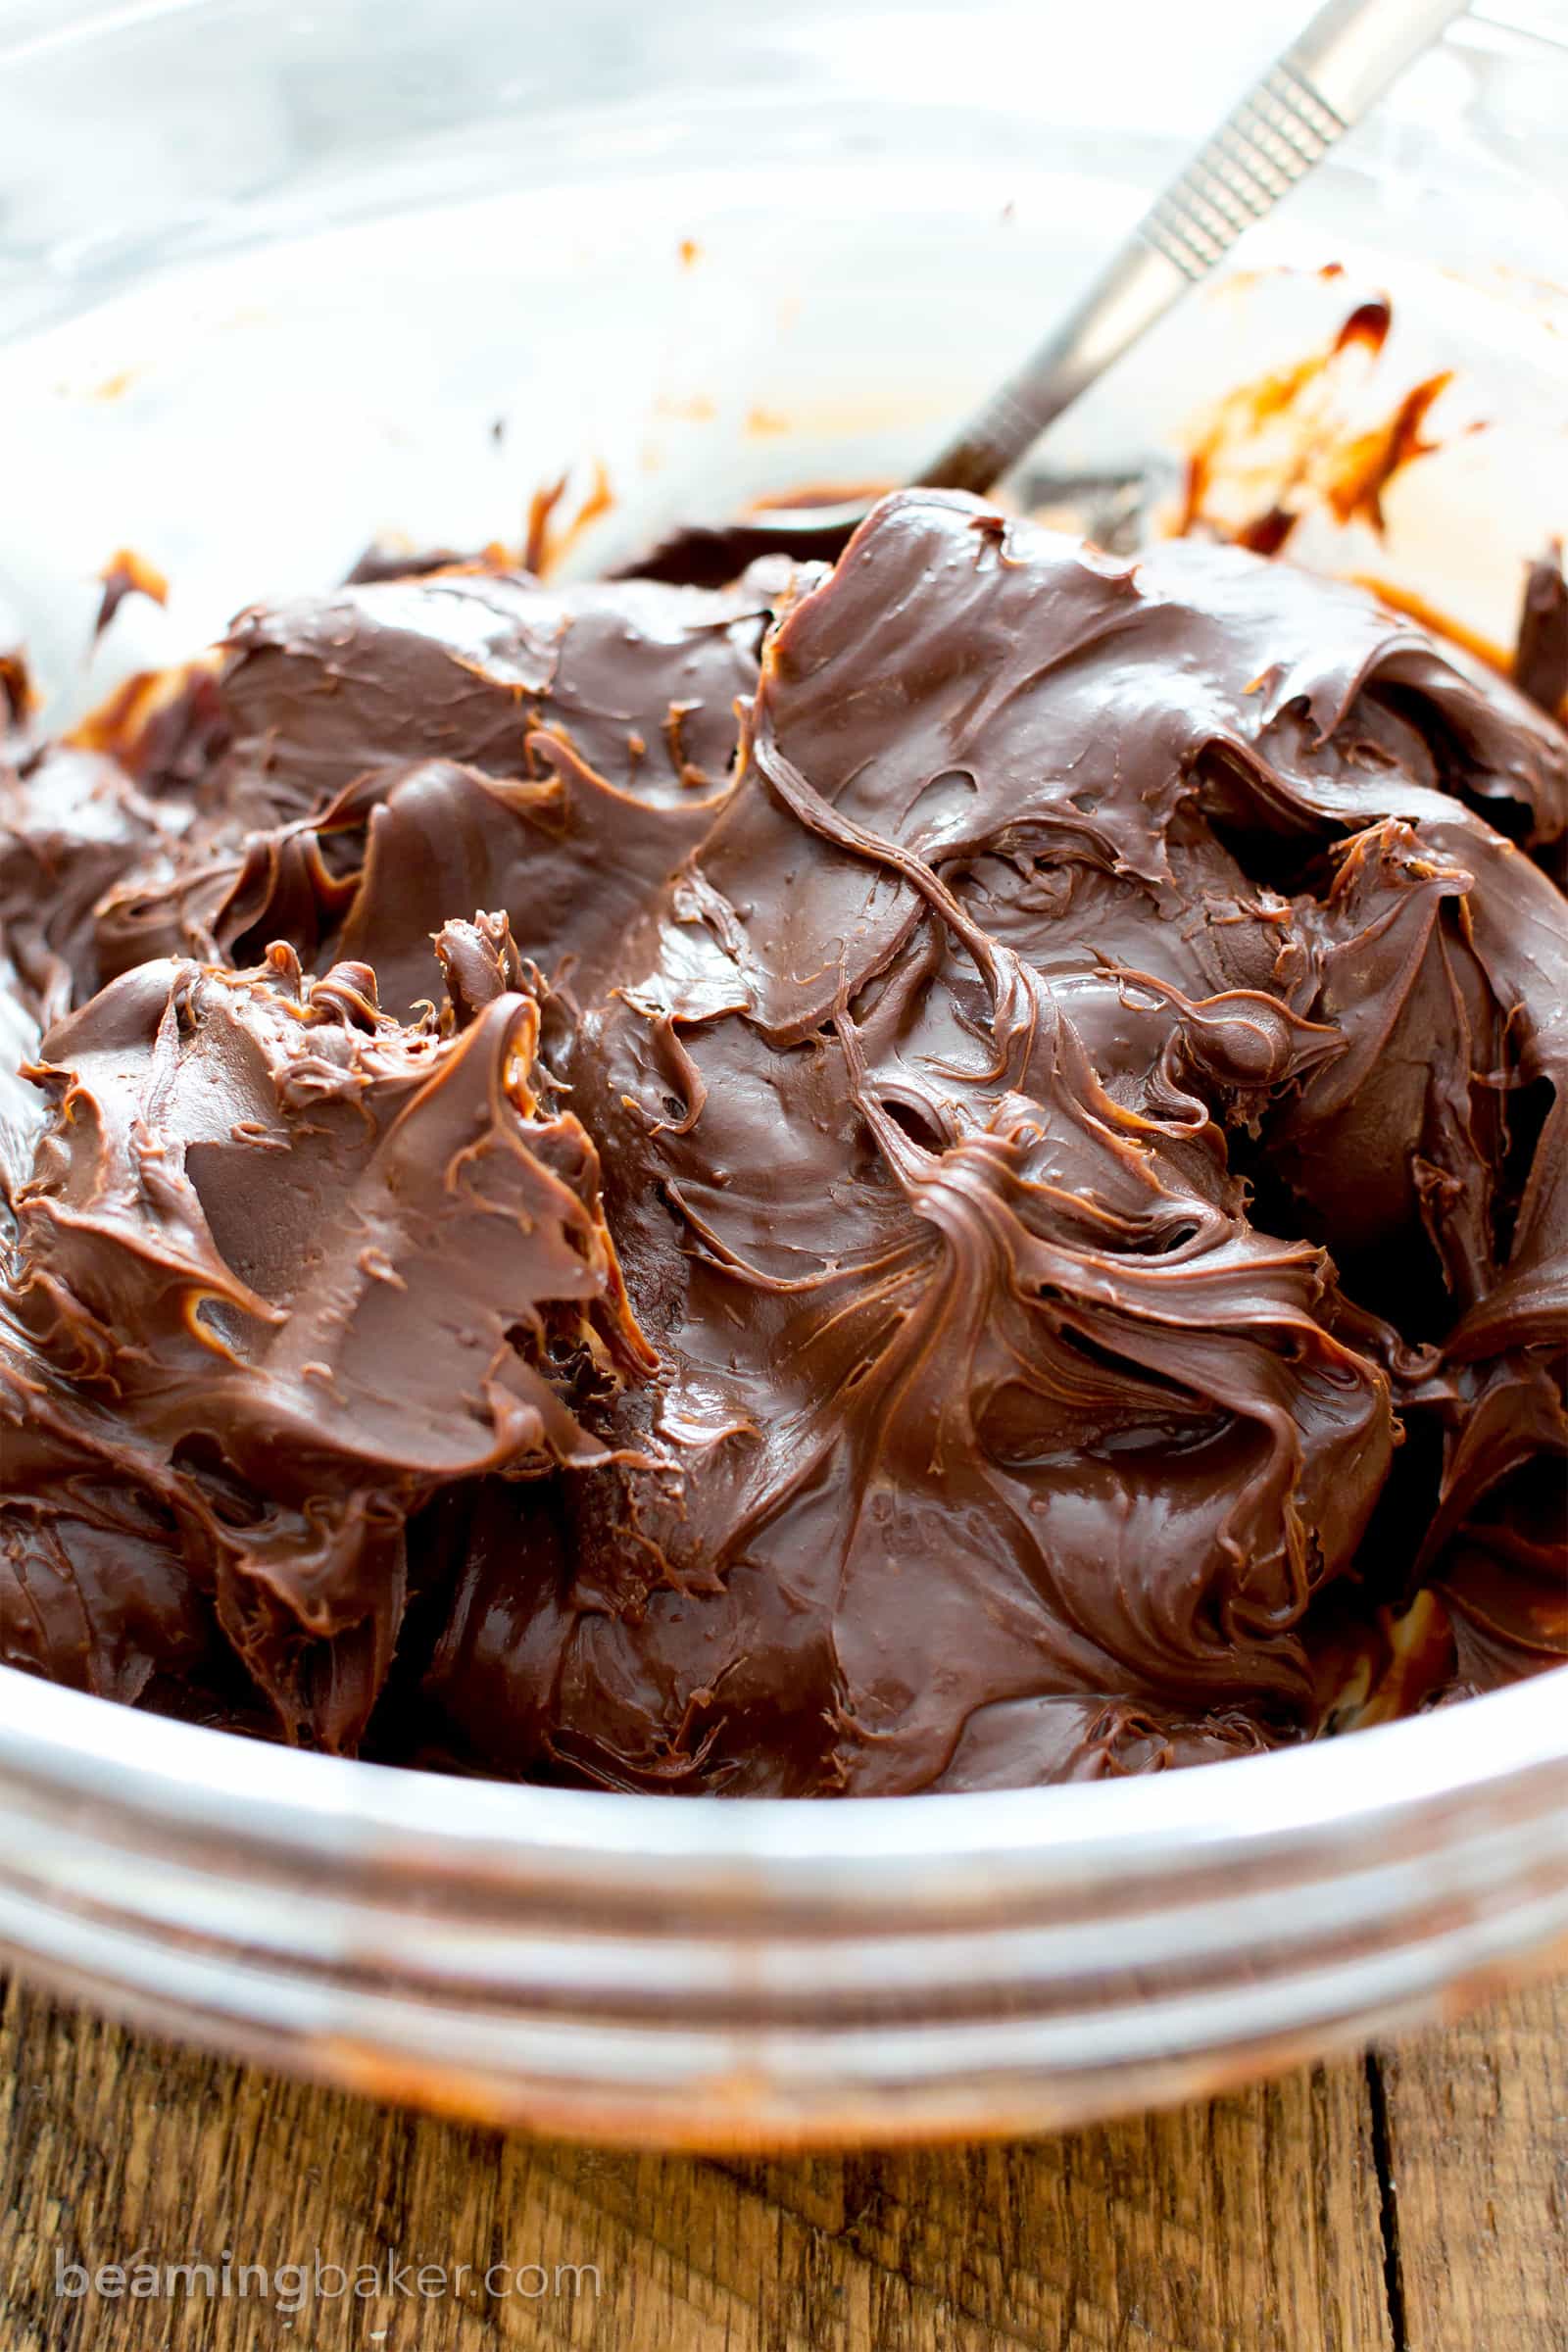 Vegan Chocolate Frosting: smooth ‘n creamy vegan chocolate frosting that’s so easy to pipe. Just 2 ingredients for the best dairy free frosting! #Vegan #ChocolateFrosting #VeganFrosting #DairyFree | Recipe at BeamingBaker.com